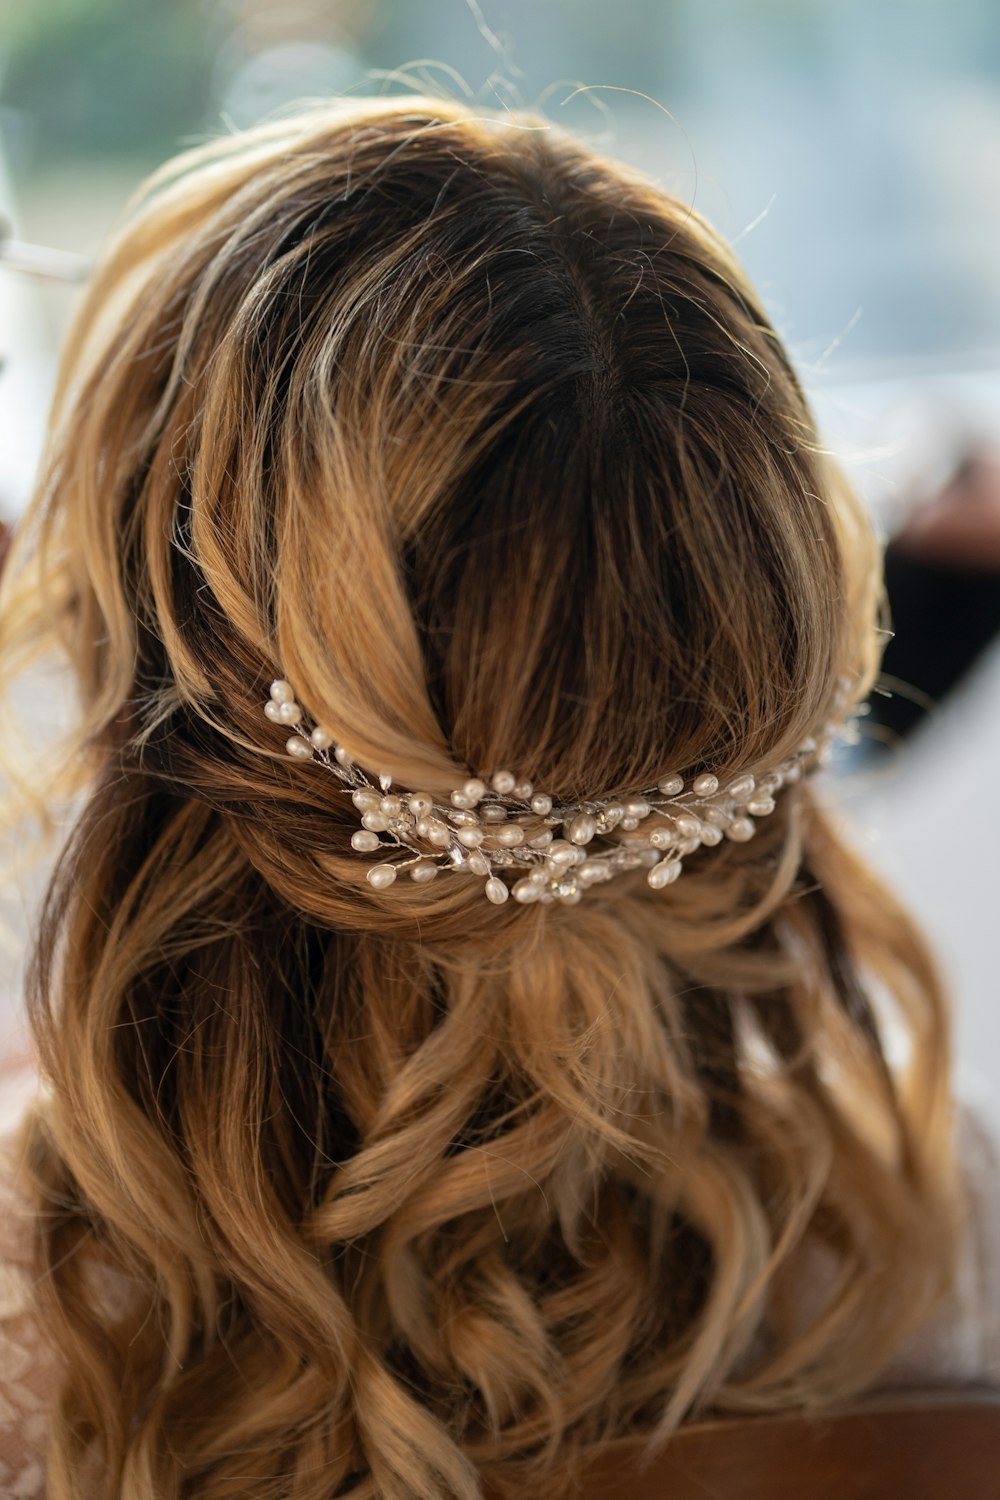 the back of a woman's head wearing a hair comb